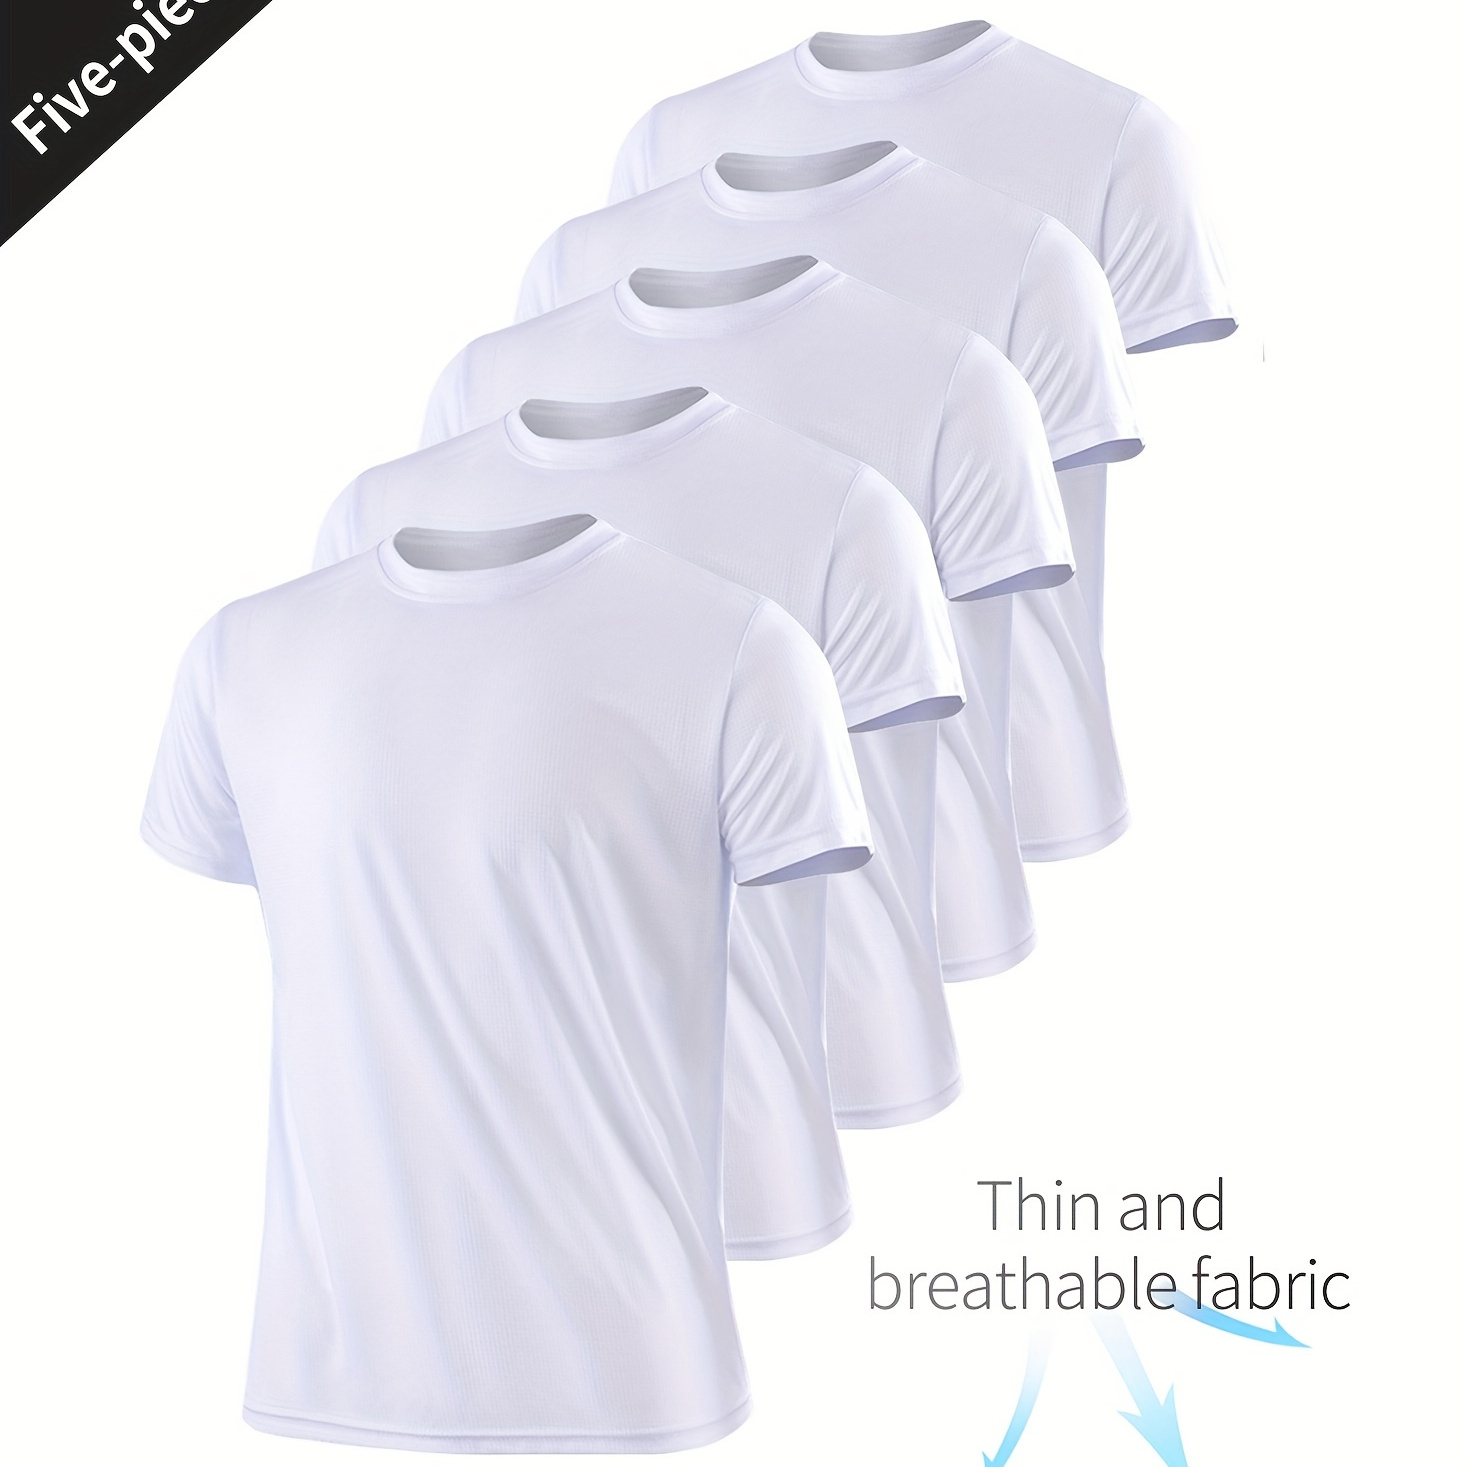 

5pcs Breathable Quick Drying Men's Sport T-shirt For Fitness, Gym, And Running - Sweat Absorbing And Bodybuilding Shirt